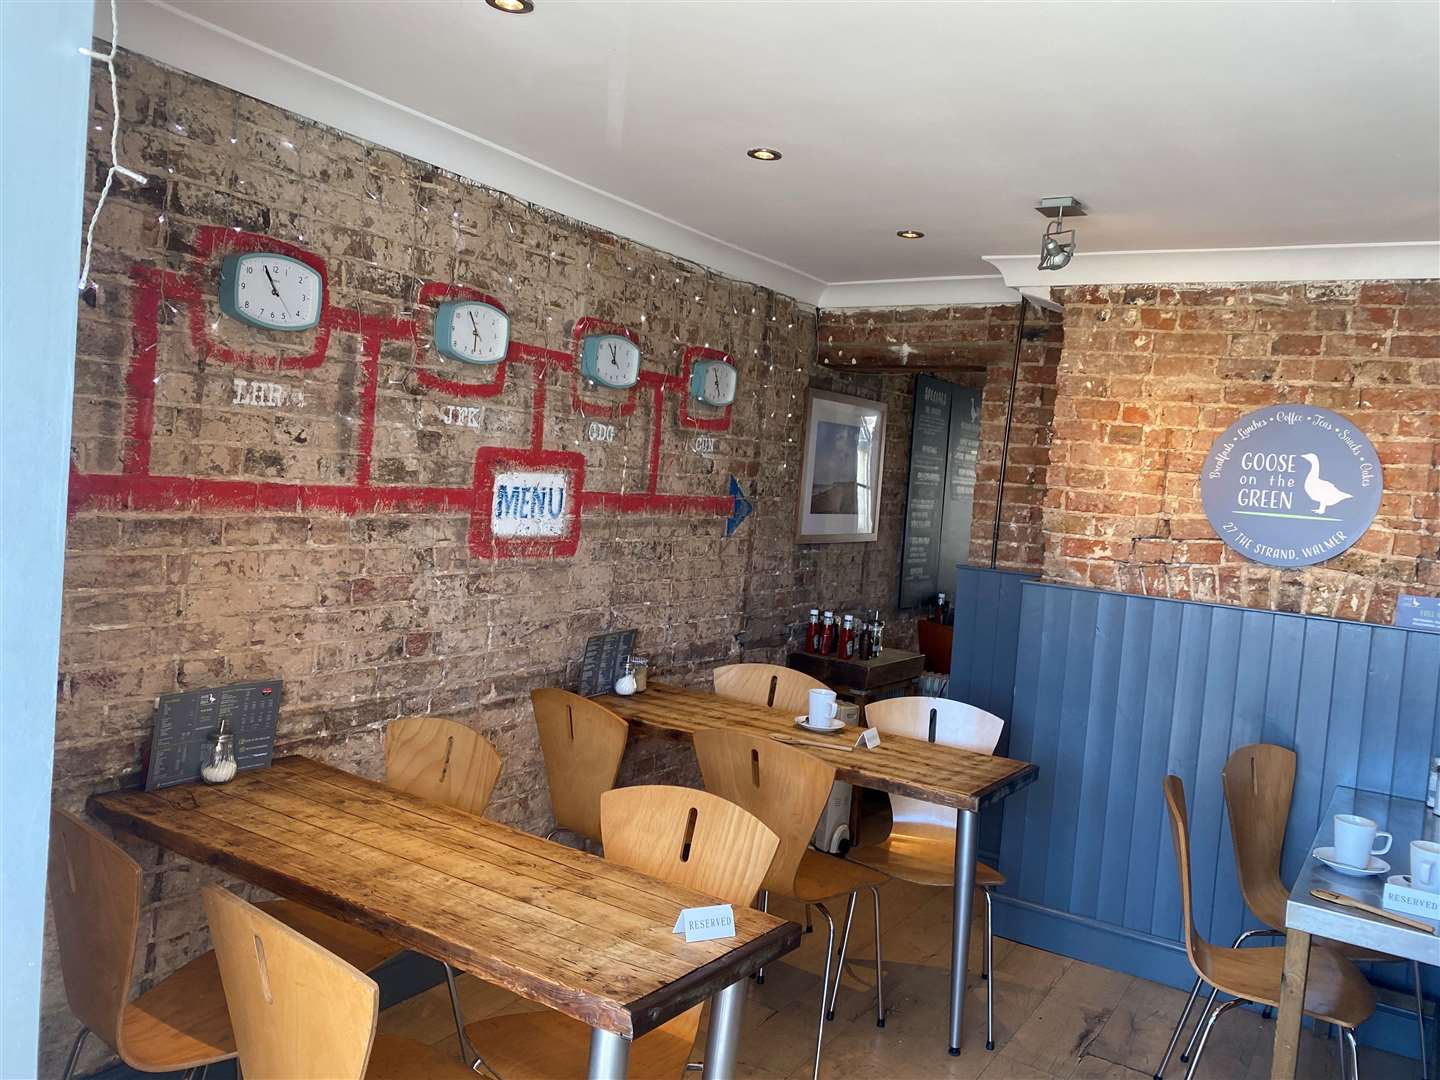 The interior of the cafe makes good use of old brickwork